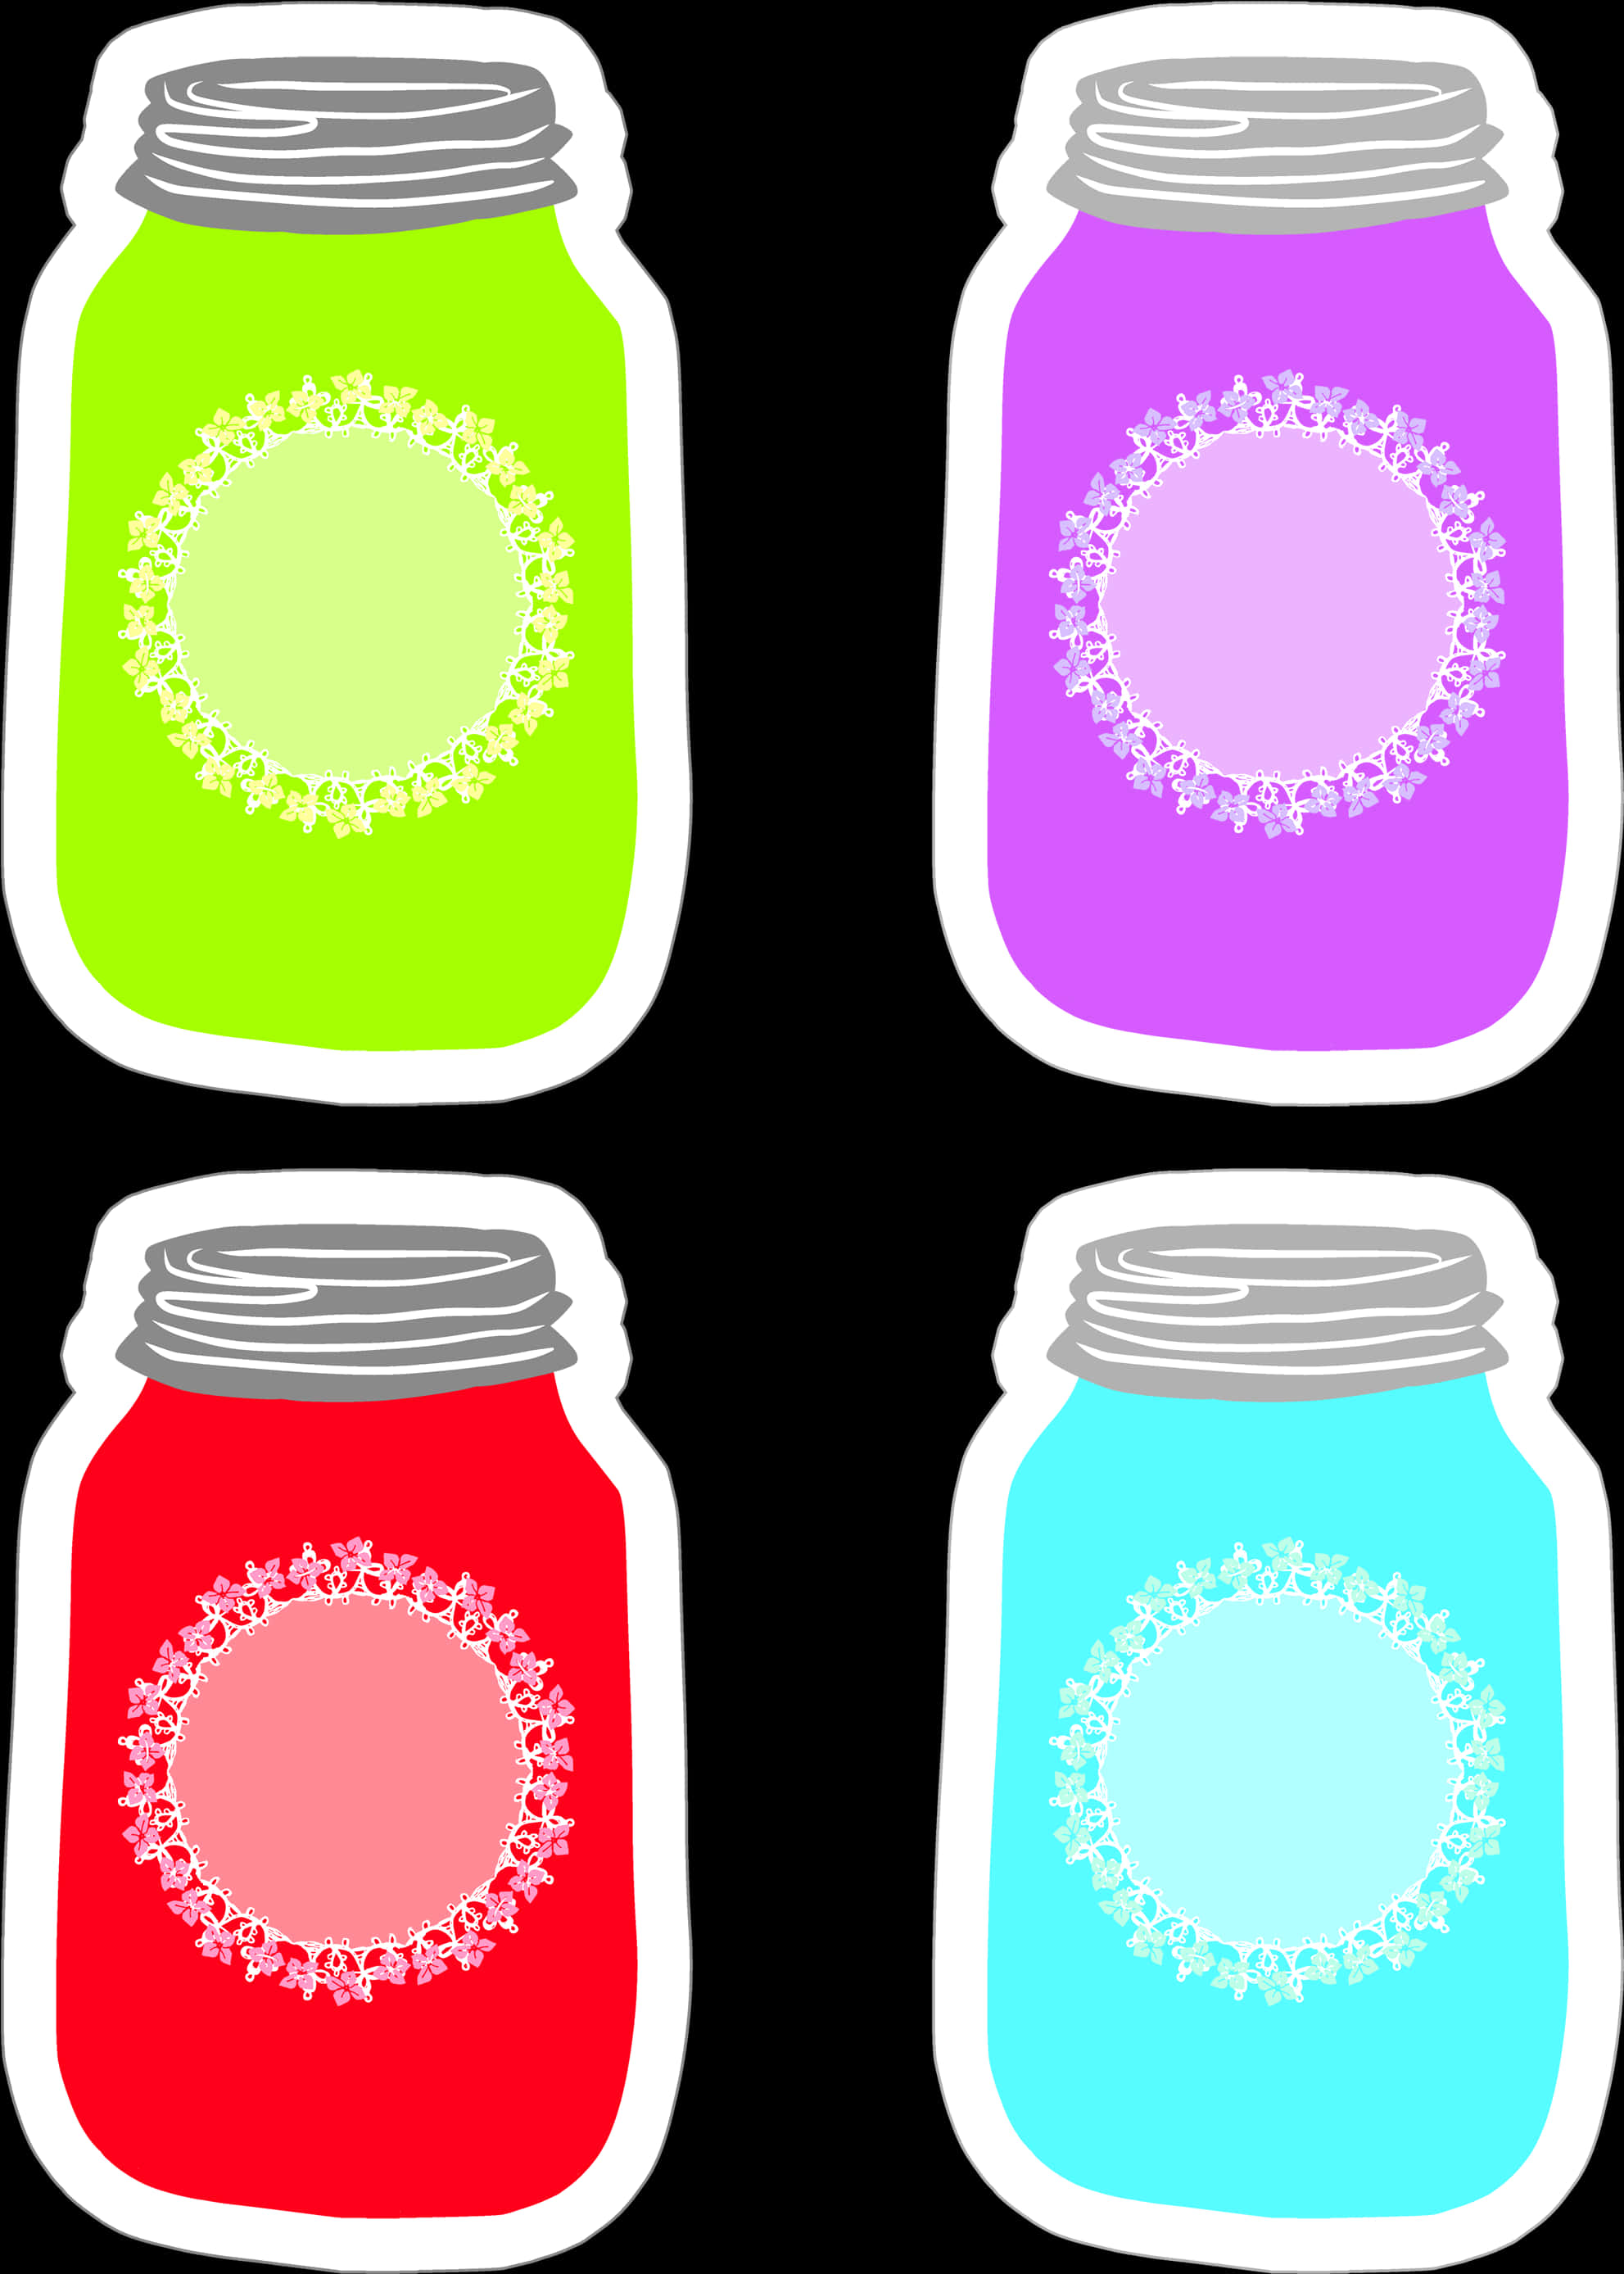 A Group Of Jars With Different Colors